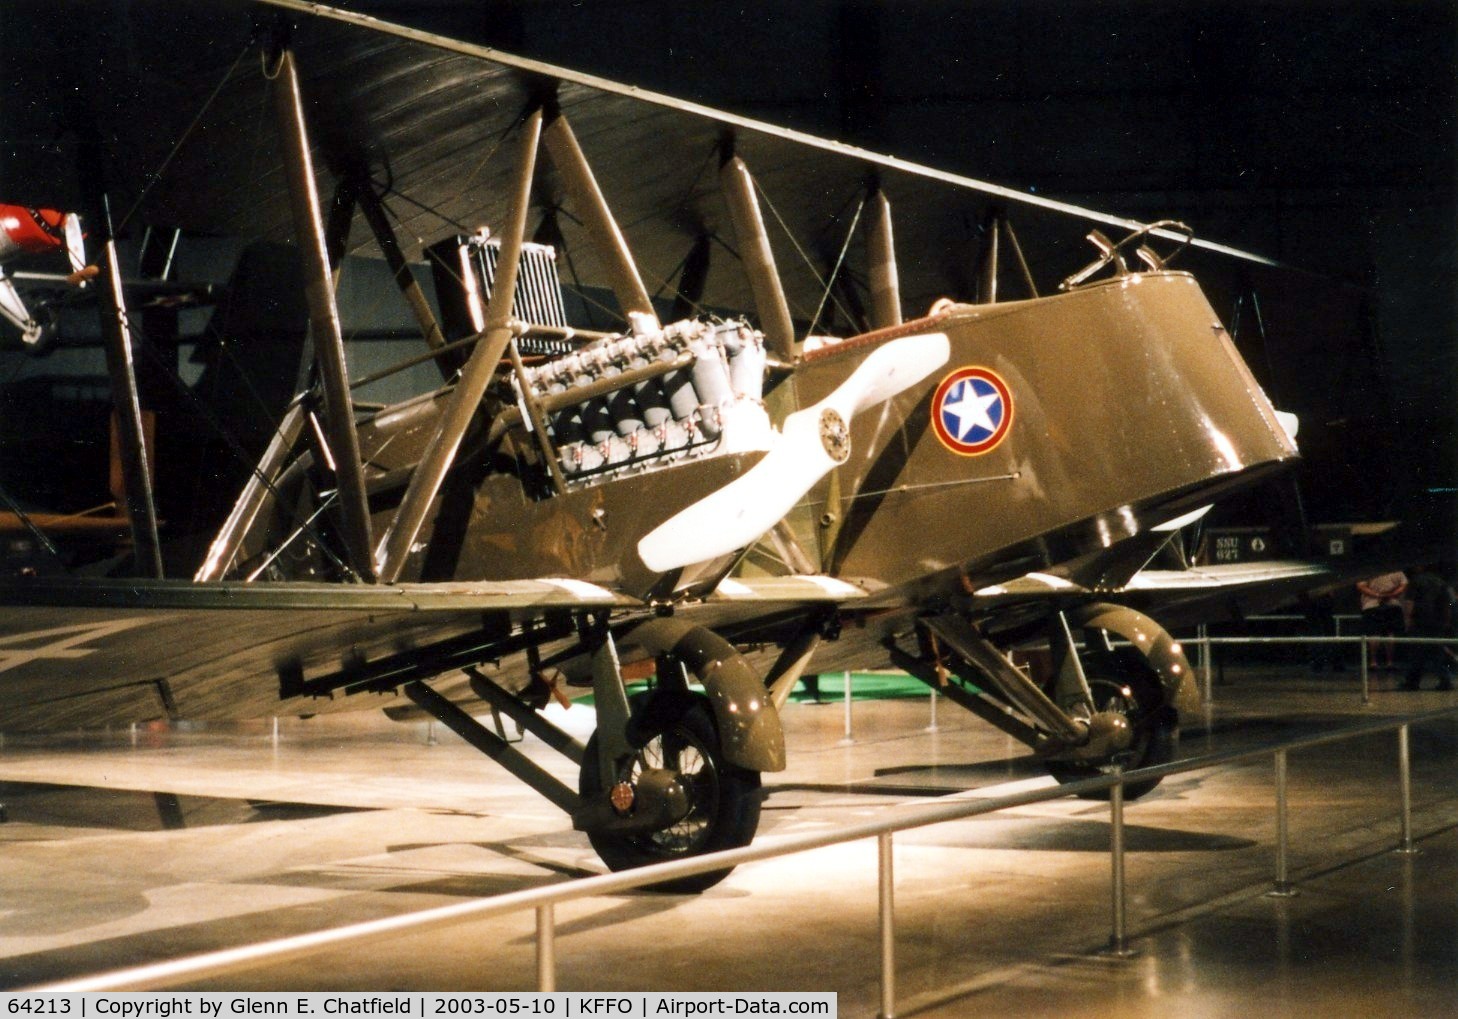 64213, 2002 Martin MB-2 (NBS-1) C/N Not found 64213, Martin MB-2 replica at the National Museum of the U.S. Air Force